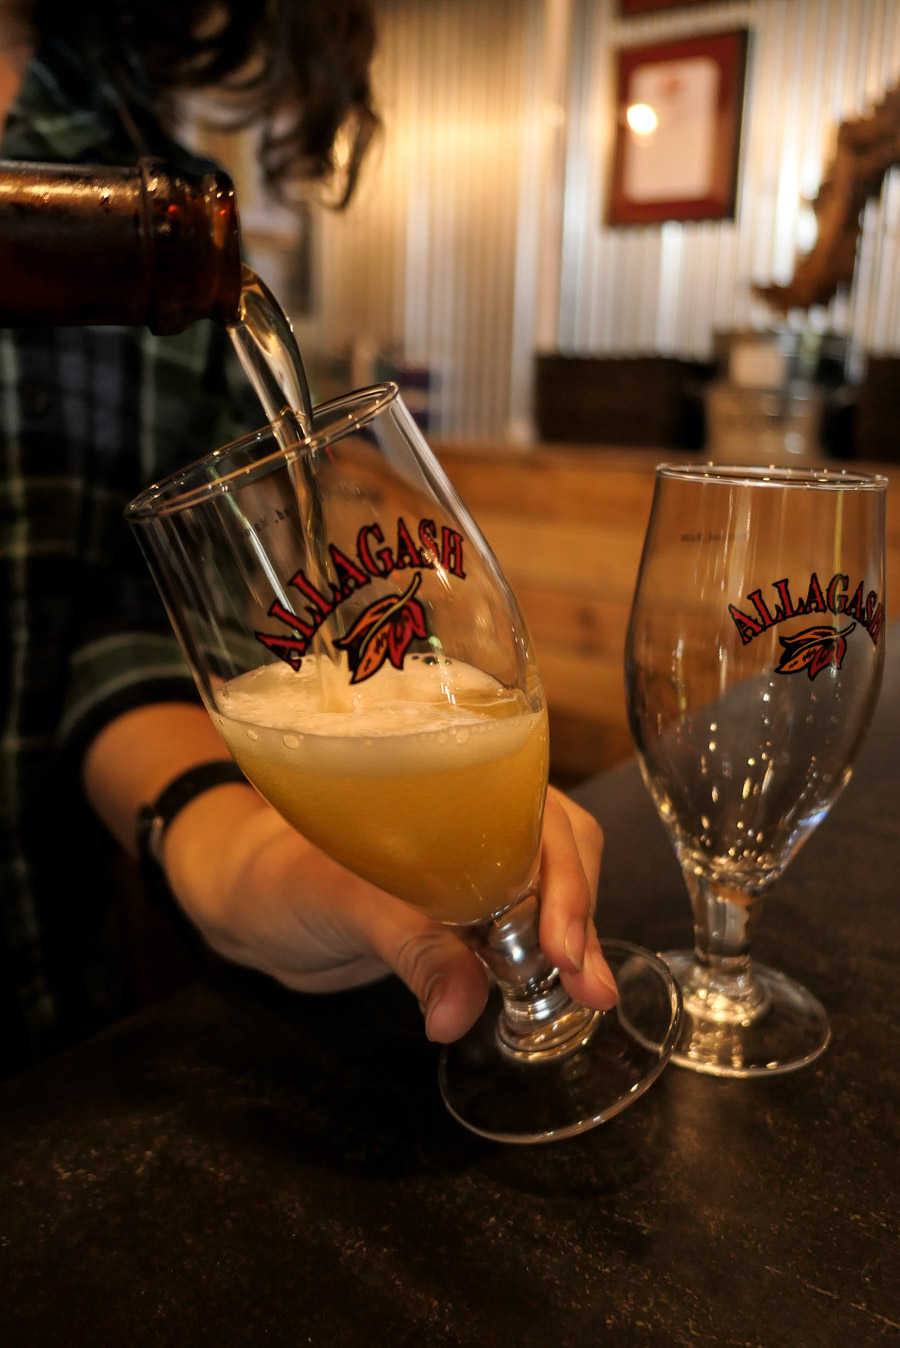 Portland Maine Things to Do and Restaurants - Allagash Brewery Tour